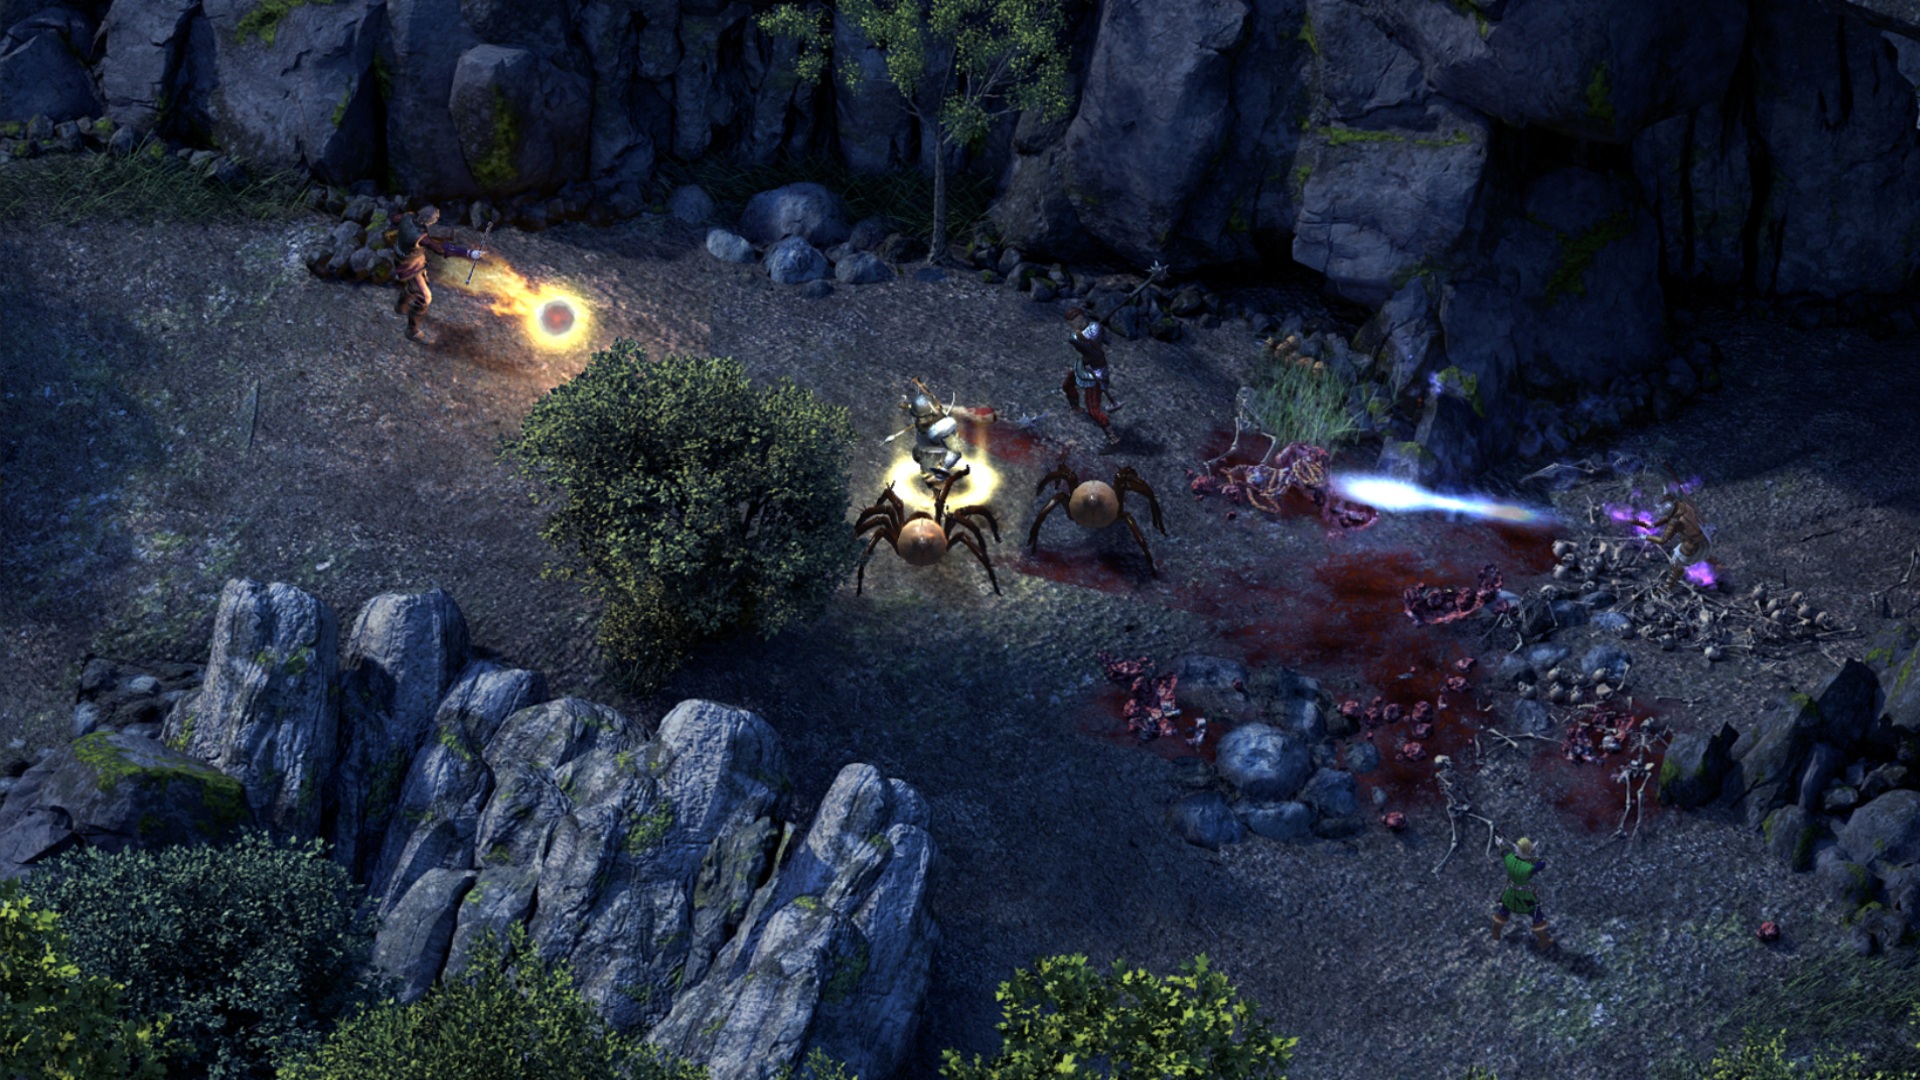 Best fantasy games: Pillars of Eternity. Image shows a battle taking place, featuring strange spider-like creatures.